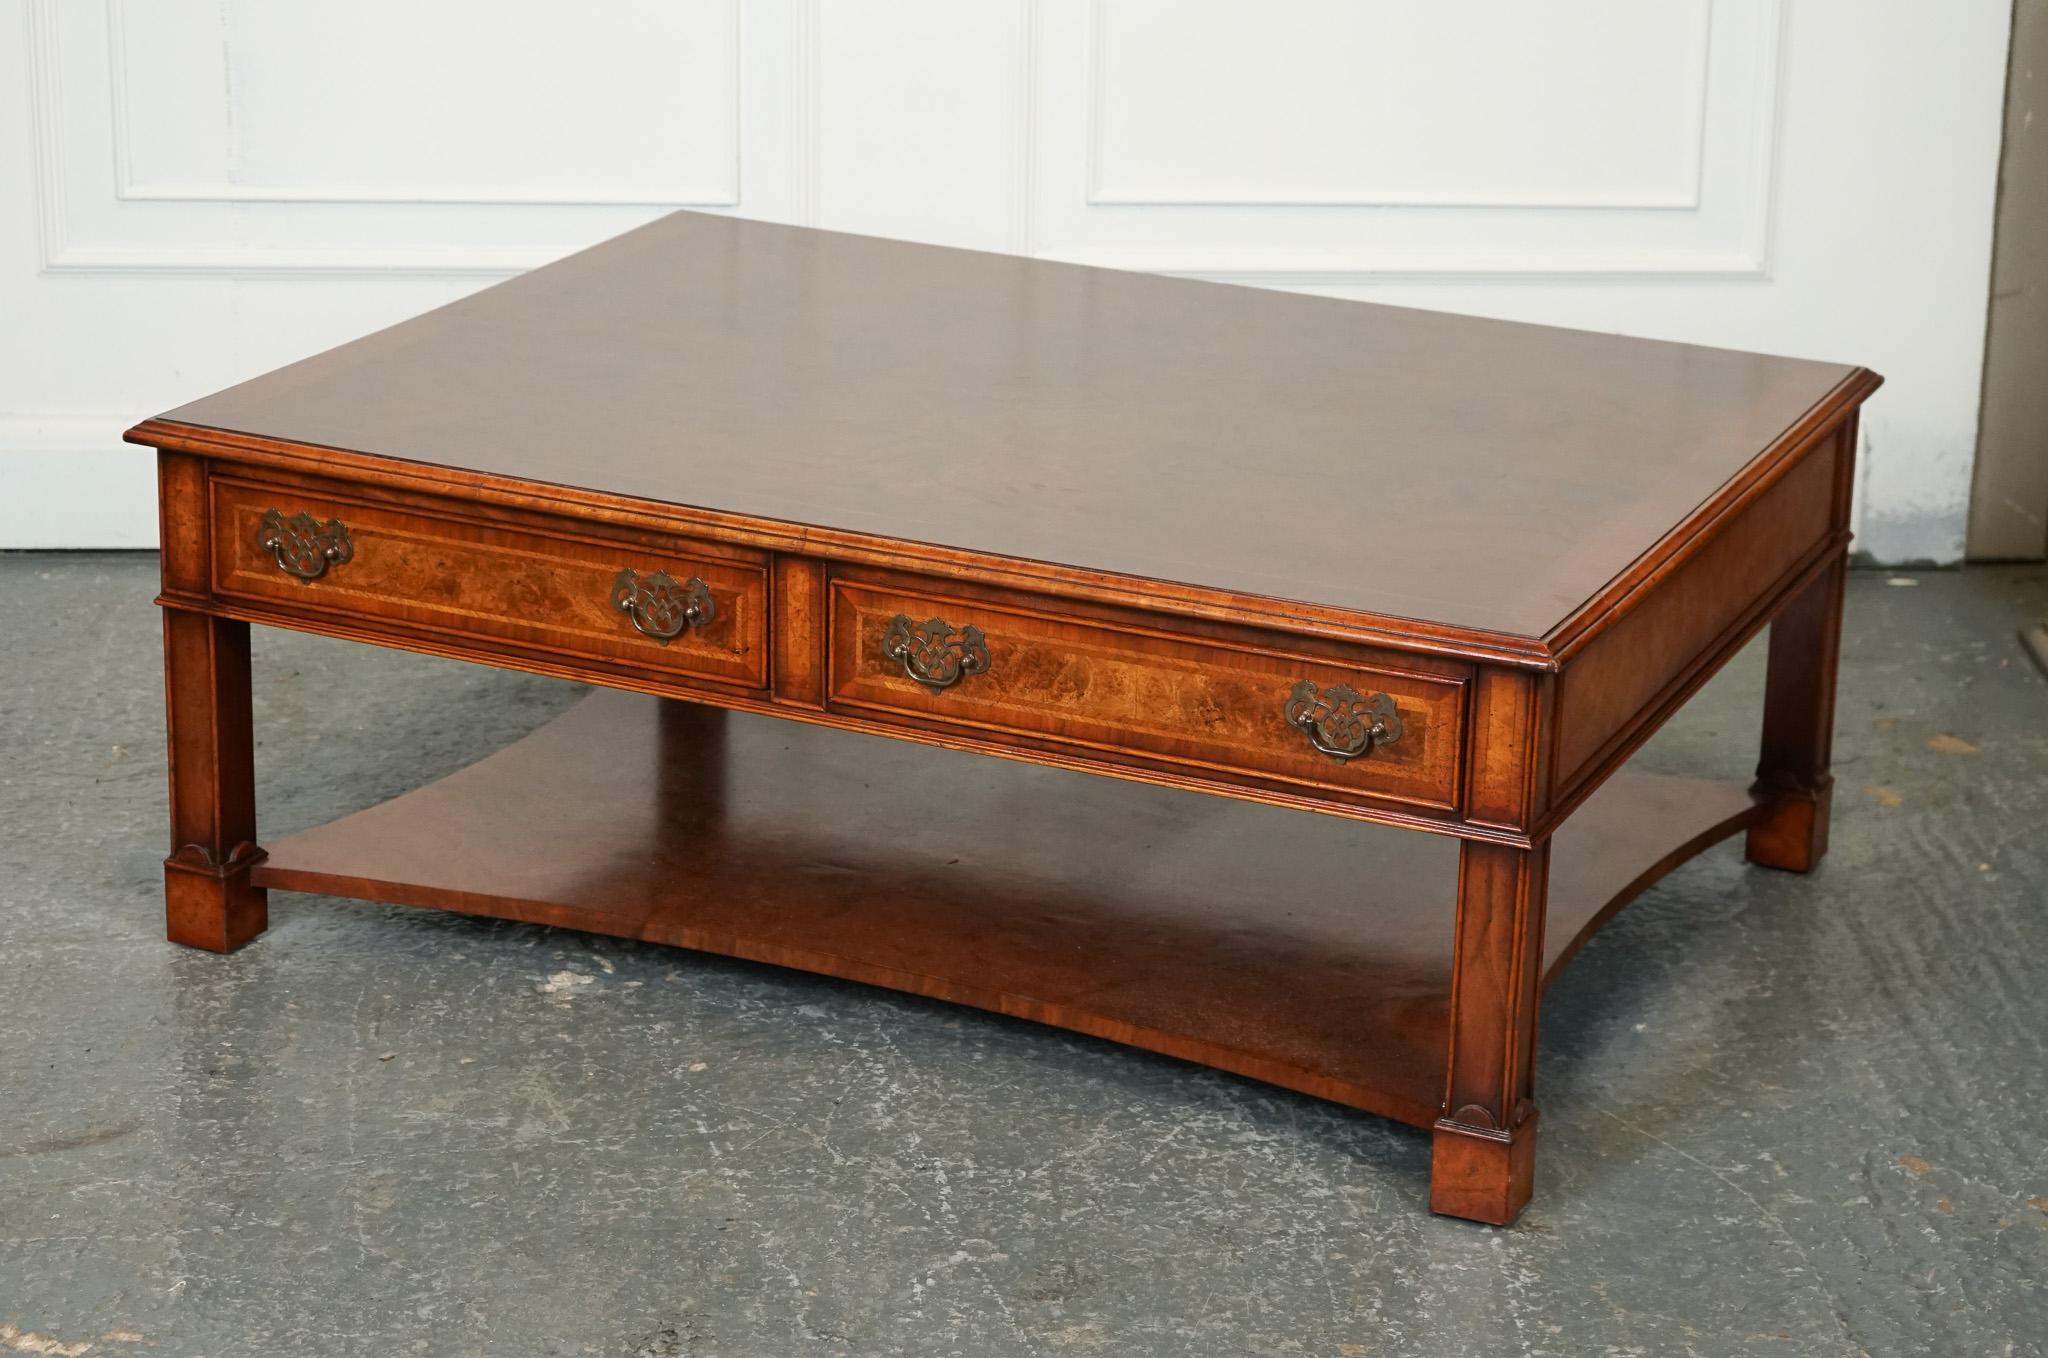 Antiques of London



We are delighted to offer for sale this Large Brights of Nettlebed Burr Walnut Coffee Table.

A large Brights of Nettlebed burr walnut coffee table with double-sided drawers is a truly remarkable piece of furniture that